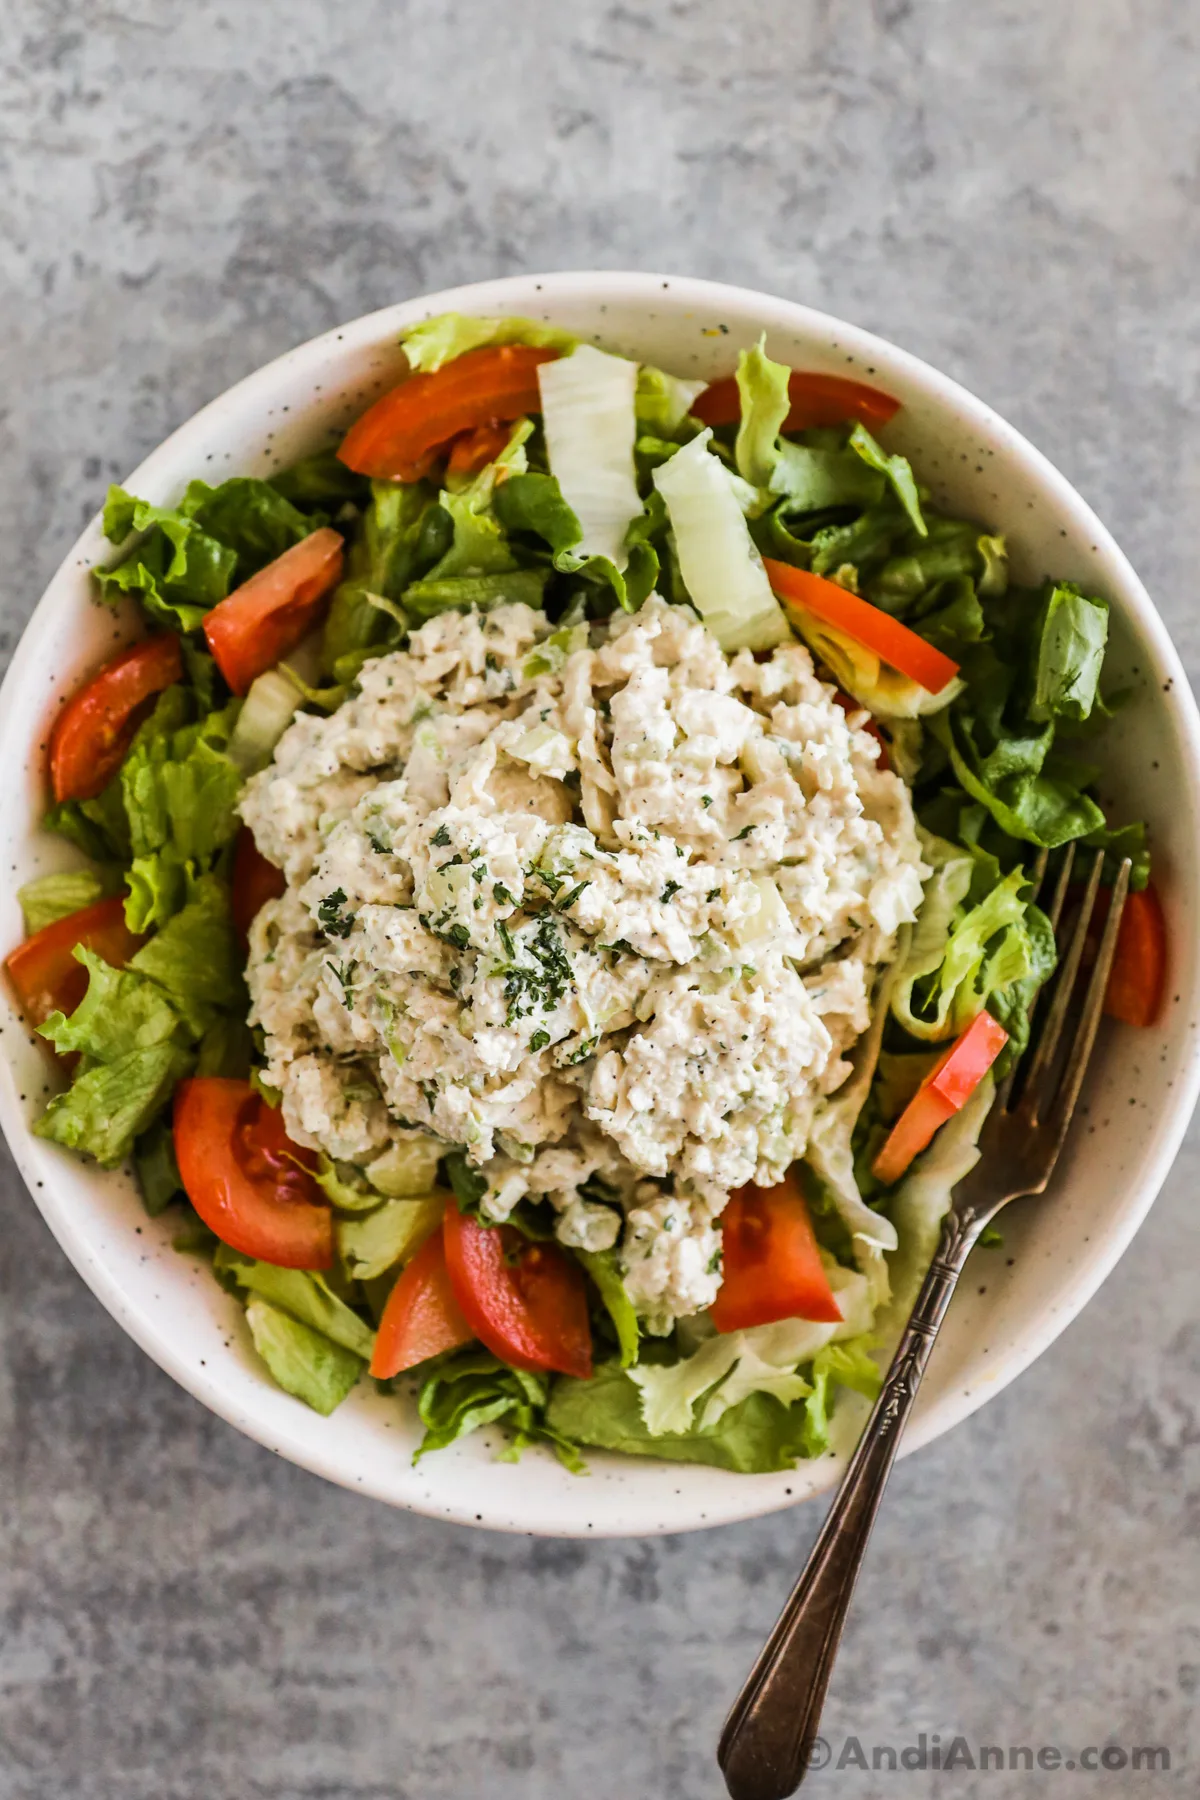 Chicken salad overtop of greens and tomatoes in a white bowl with a fork.